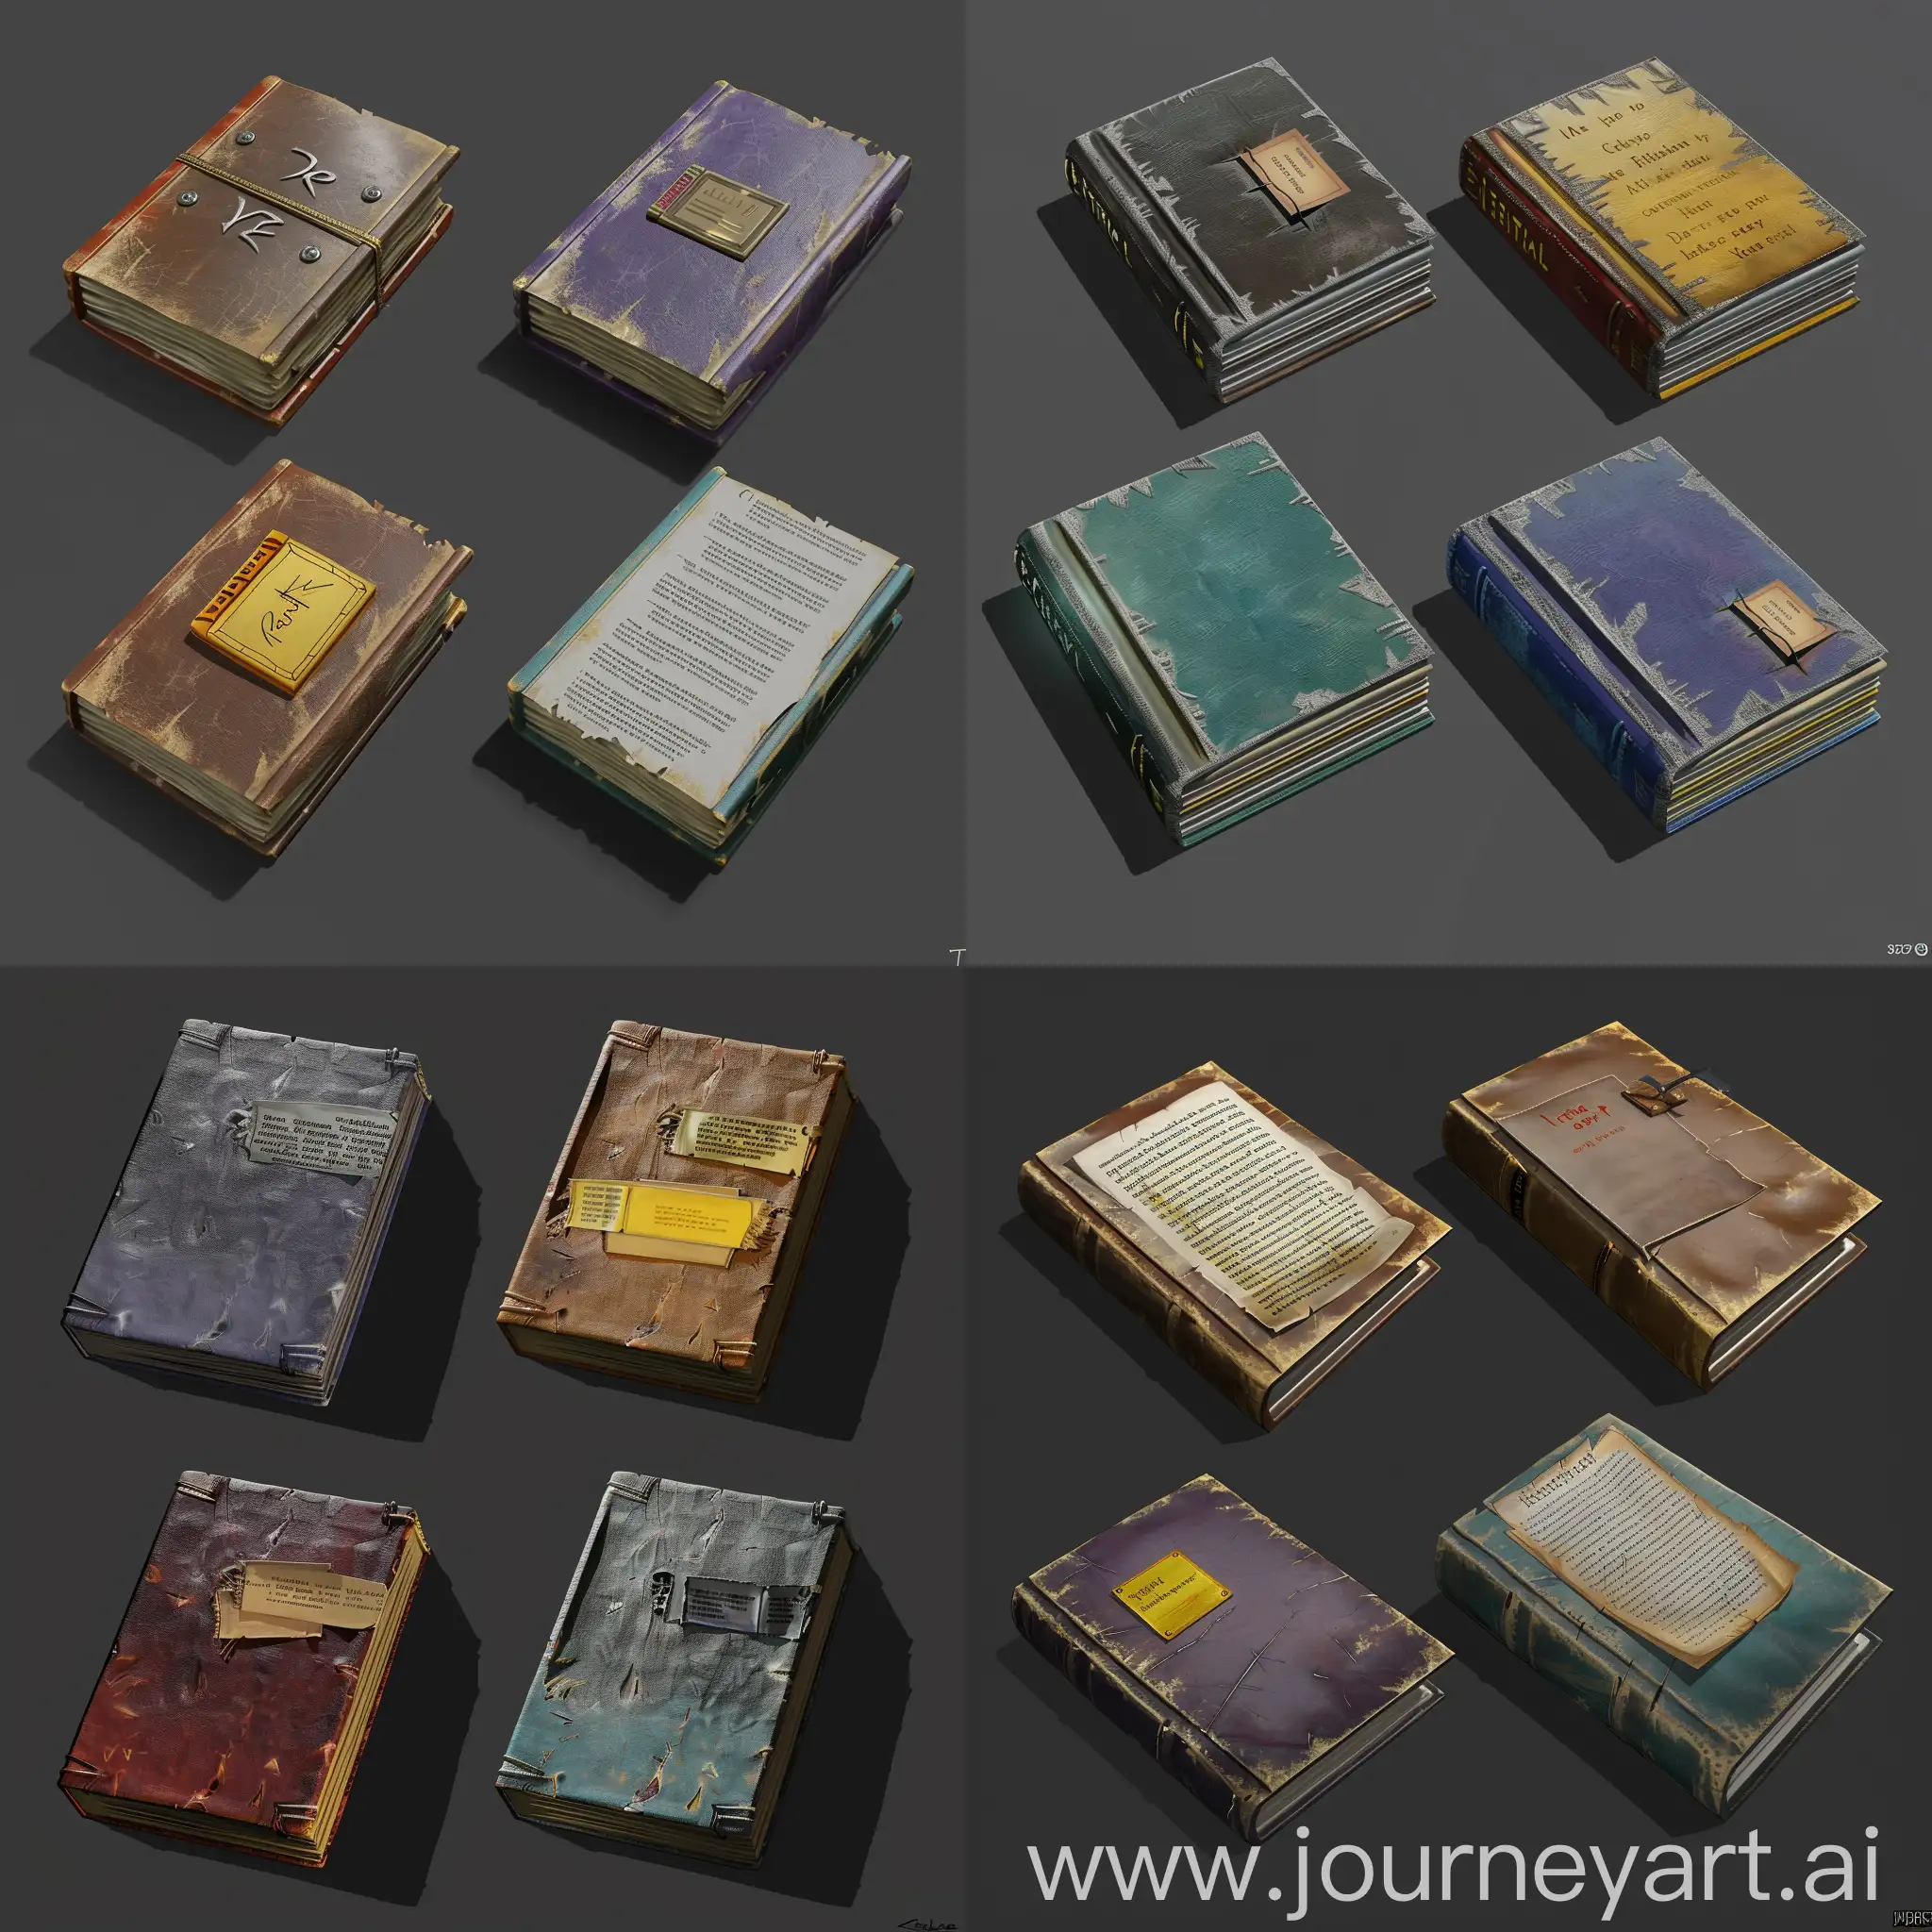 https://imgbly.com/ib/NhVu9noHmK.jpg realistic worn thin books without text in style of realistic 3d blender game asset, leather cover, realisic style